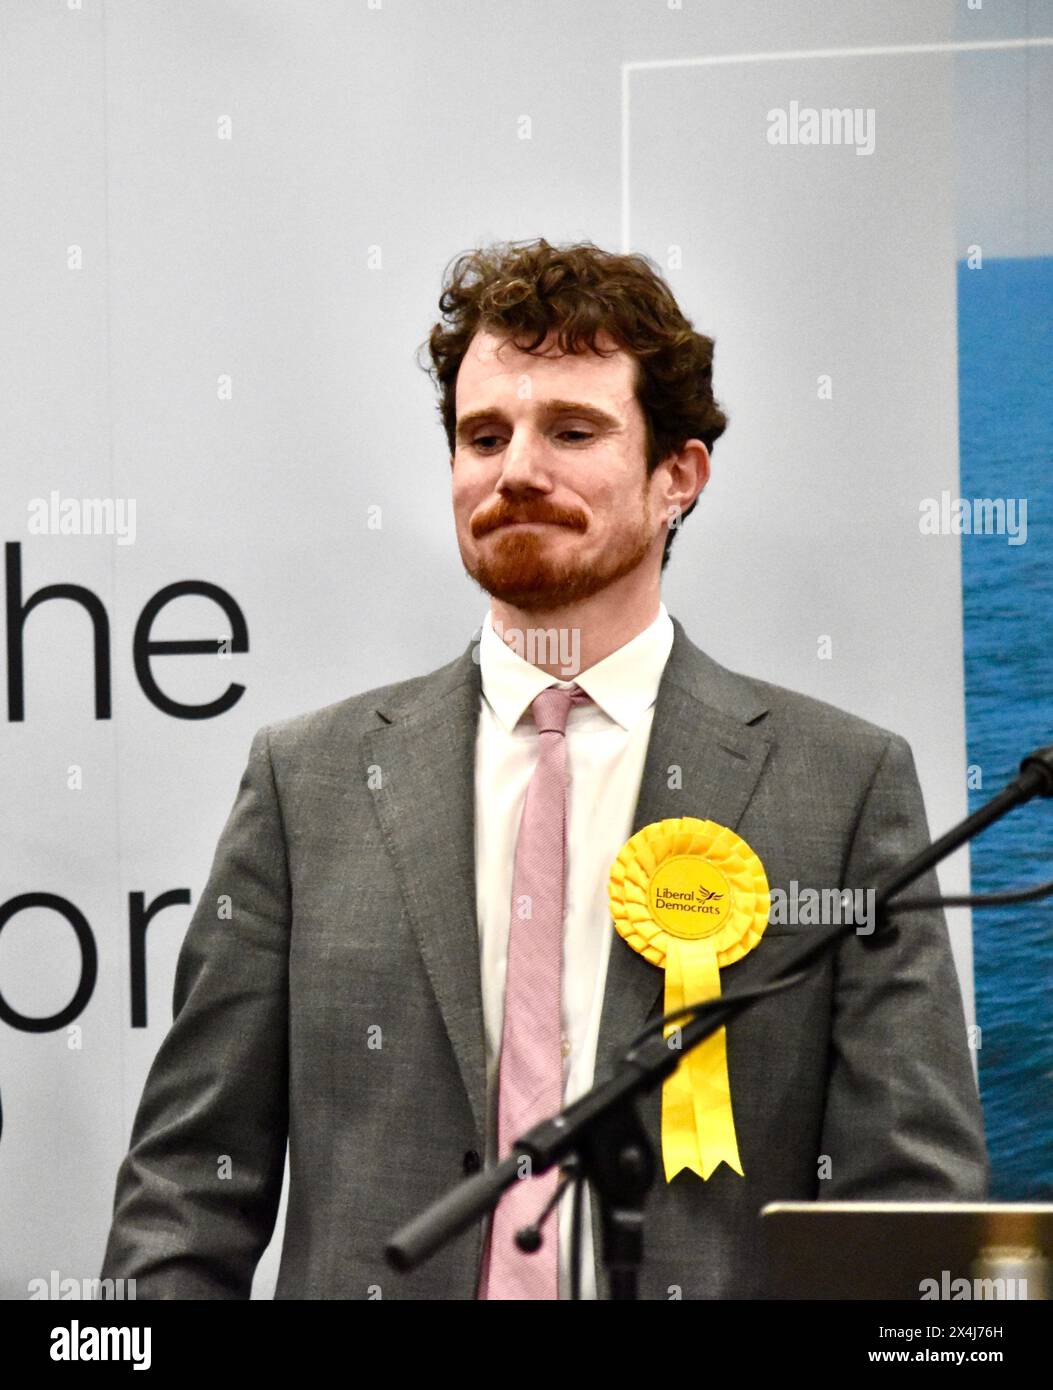 Stockton-on-Tees, UK. 03 May 2024. Liberal Democrats candidate Simon Thorley looks dejected as Bern Houchen is announced as Tees Valley Mayor, for a third time. Credit: James Hind/Alamy Live News. Stock Photo